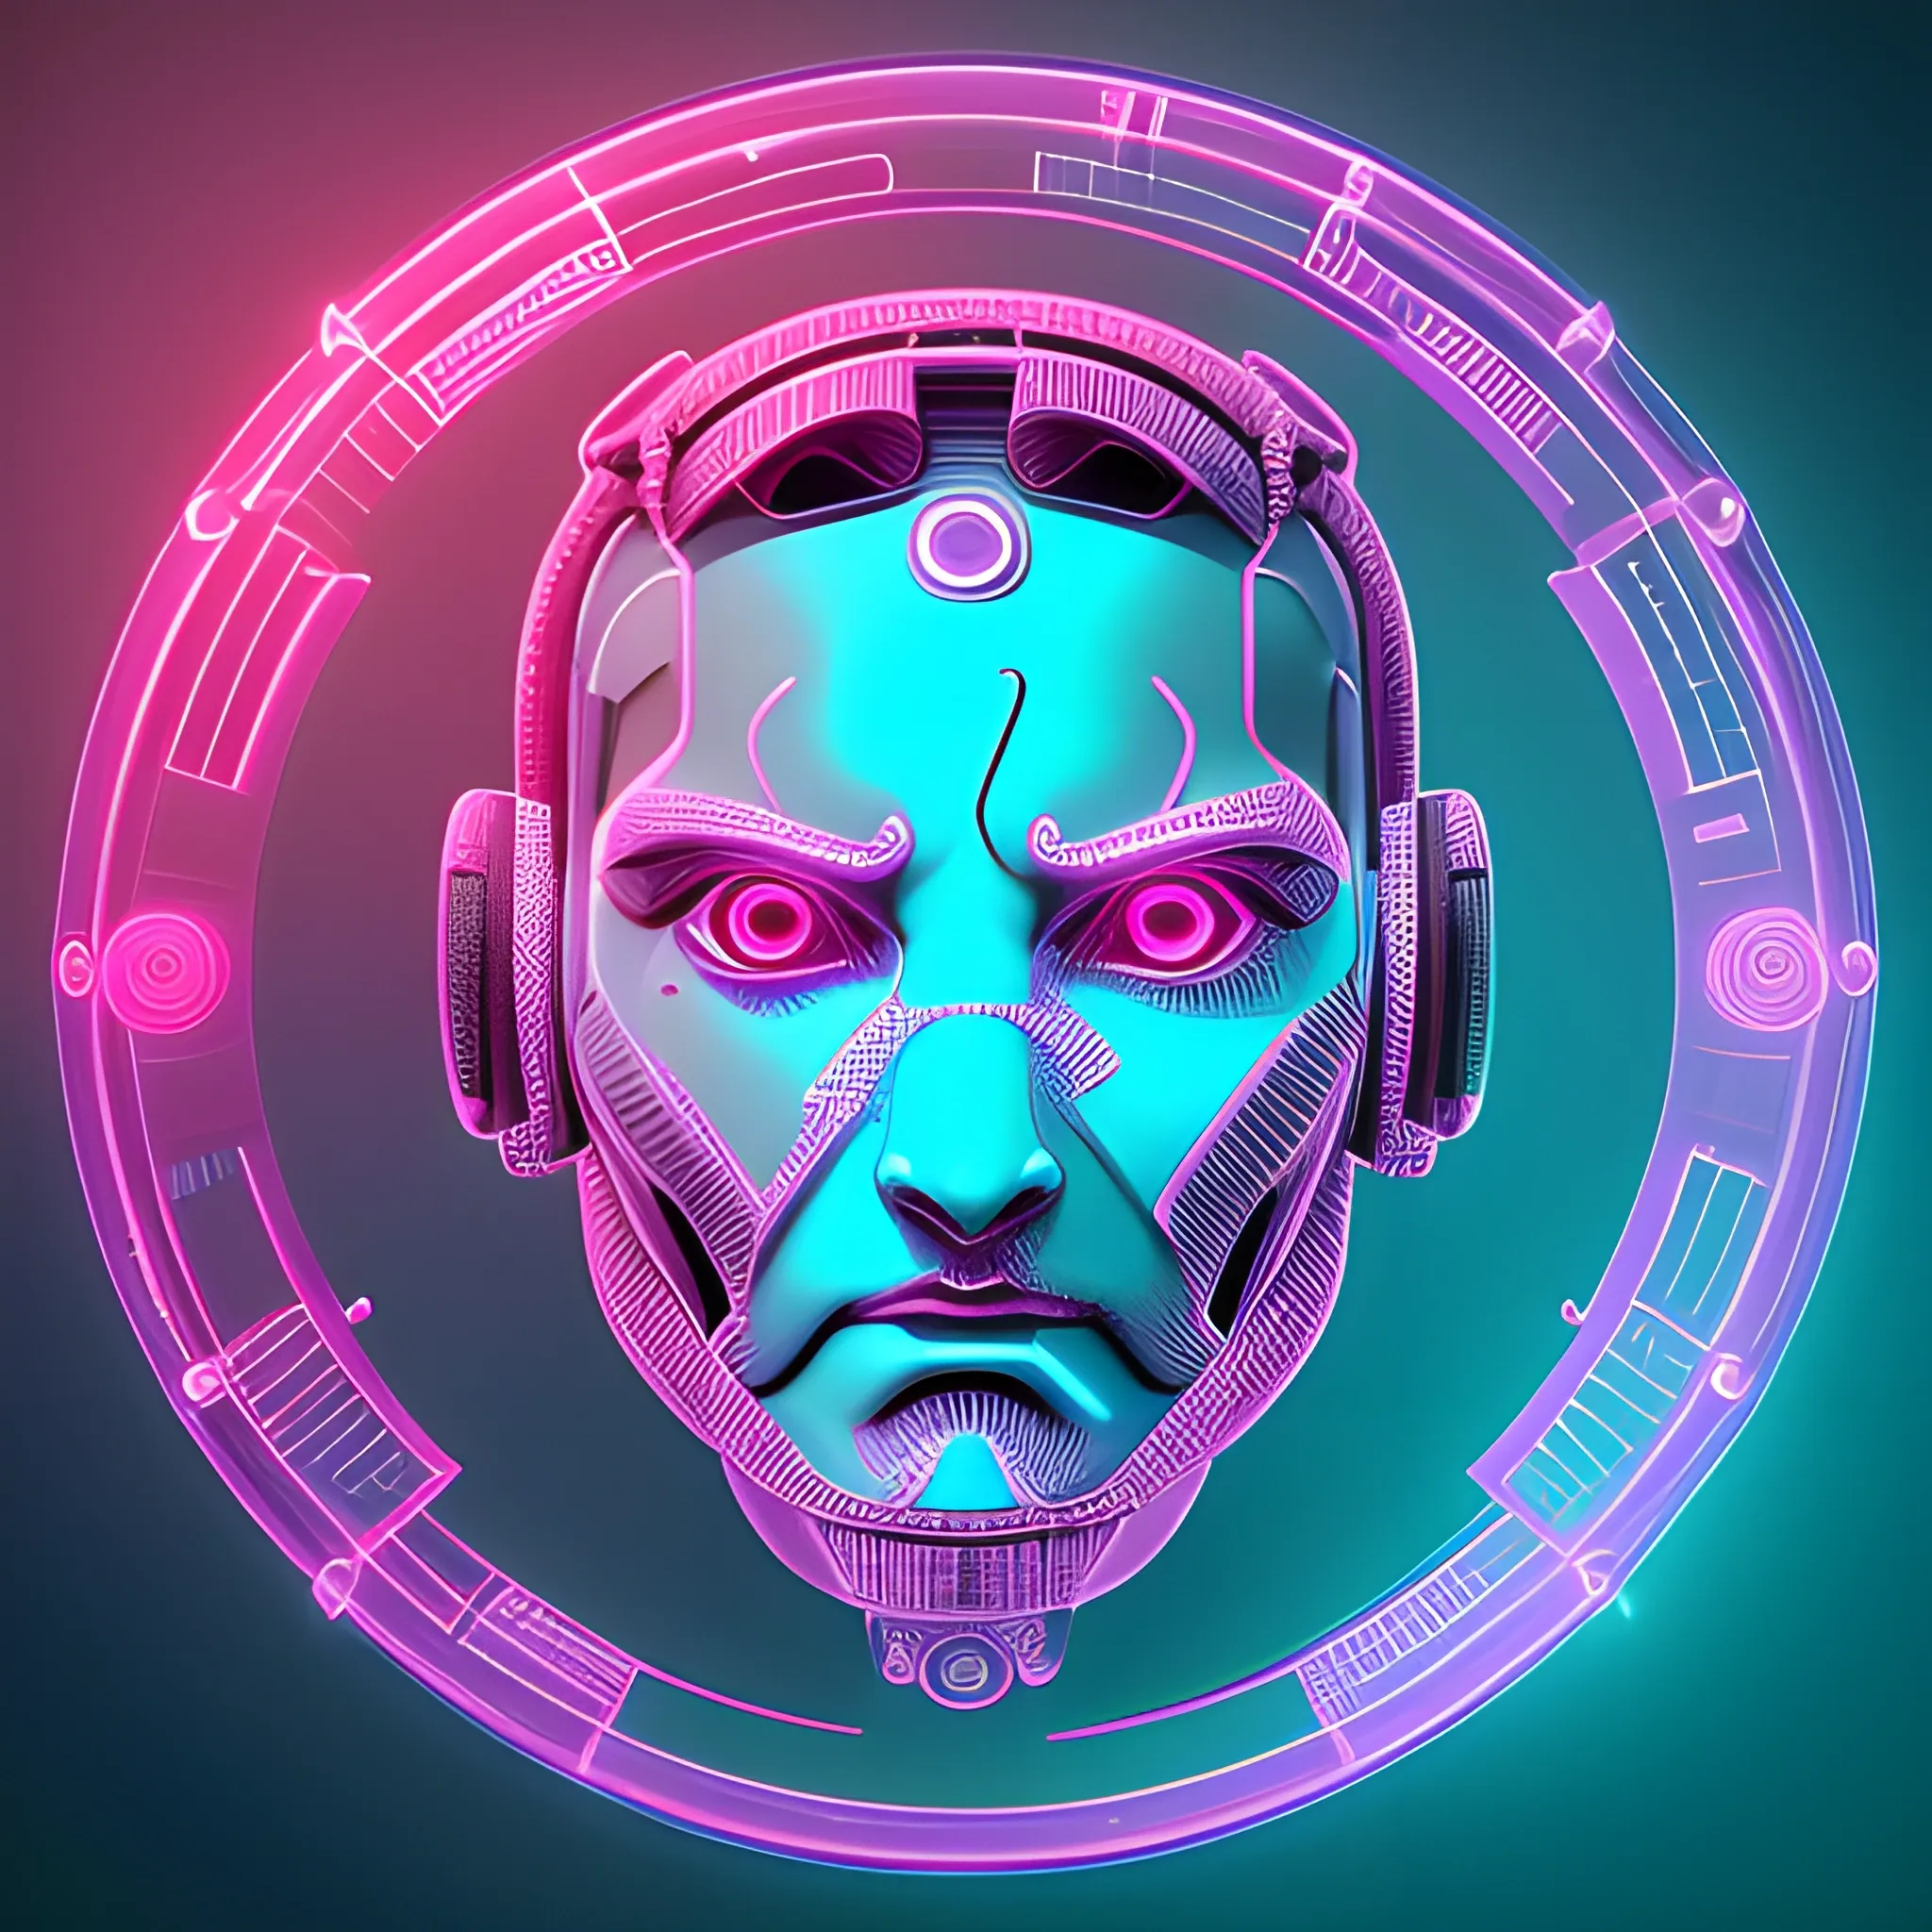  sci-fi font capital letter V, high-definition, realistic, intricate wavelength detailing, embossed circular frame, 3D, Sci-Fi, Hip-hop, Urban, pink and cyan colored, sacred geometry, circular male cybernetic avatar, glowing eyes